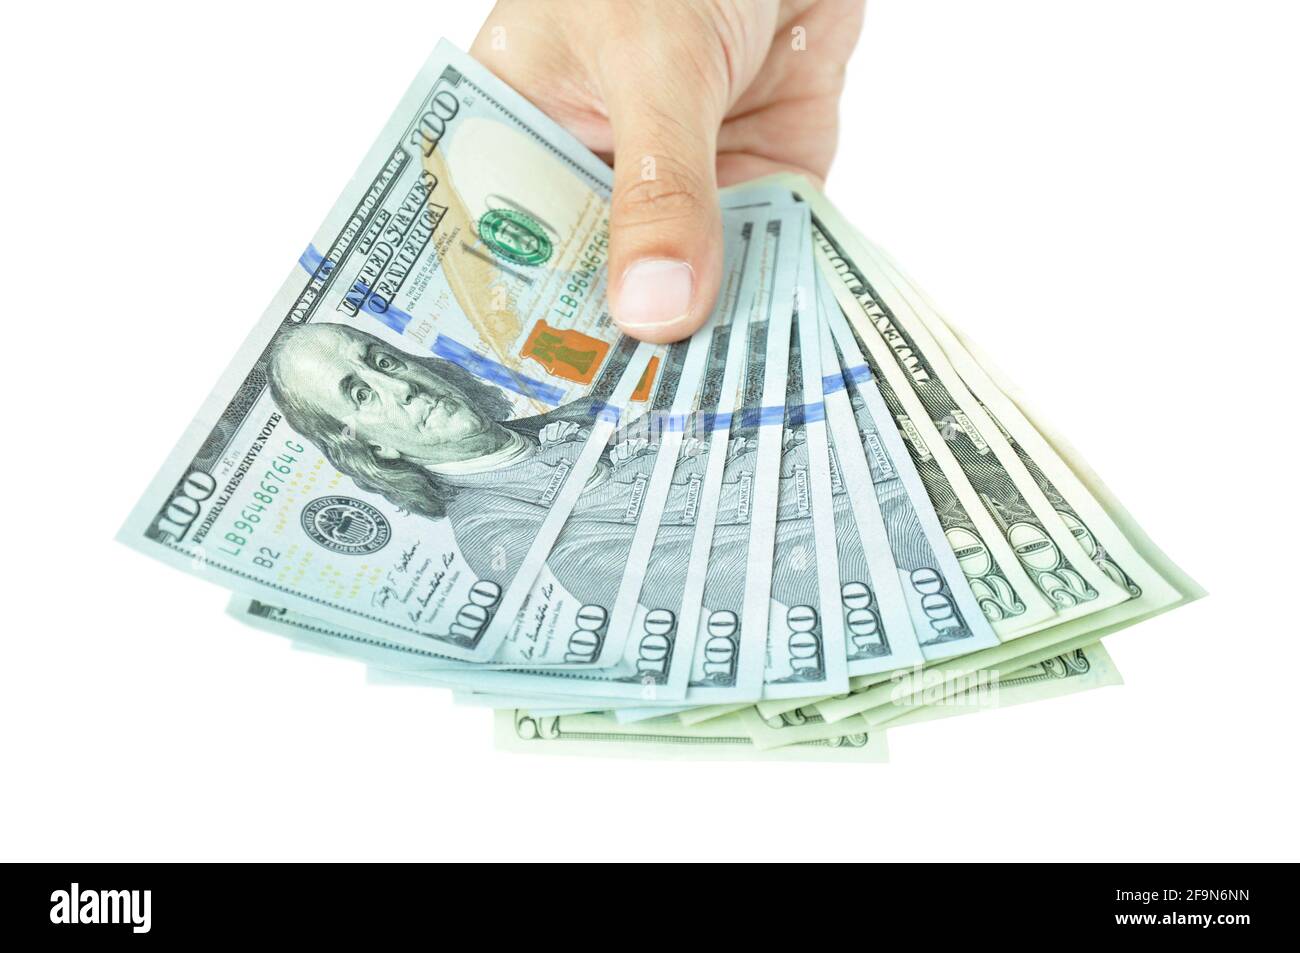 Money - hand holding banknotes - United States Dollars or USD Stock Photo